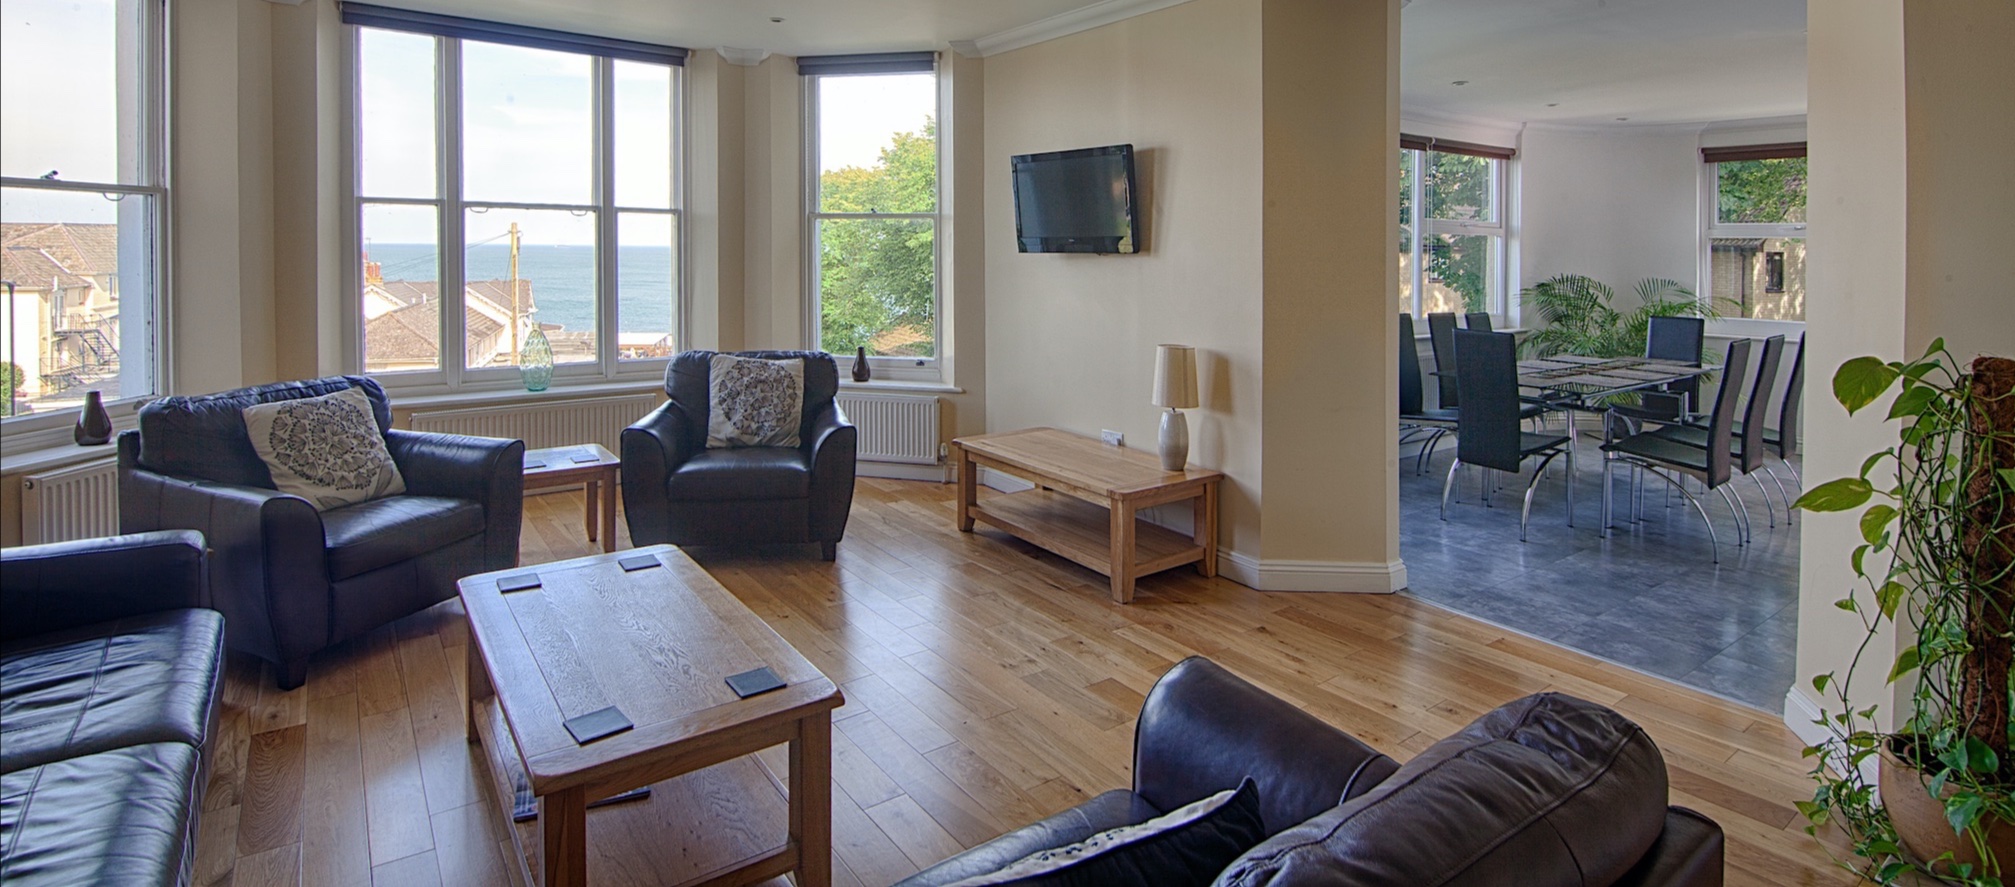 Shanklin Villa, Luxury Self Catering Holiday Apartment, Isle of wight